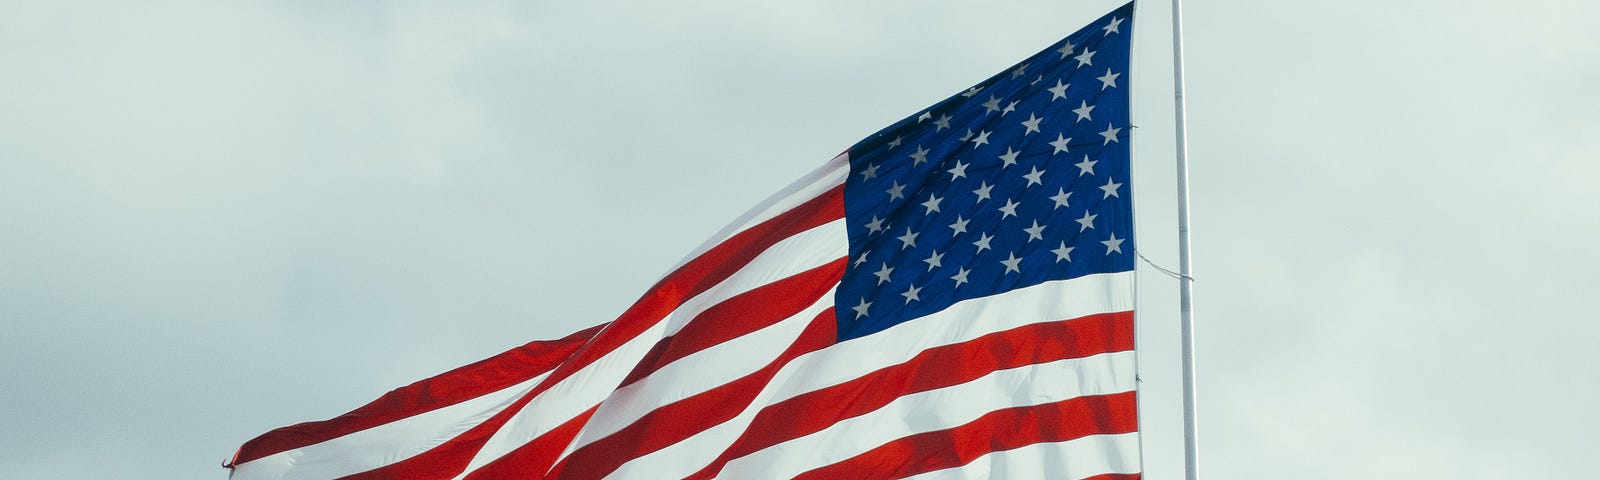 american-flag-stock-markets-zinvest-financial-stock-trading-app